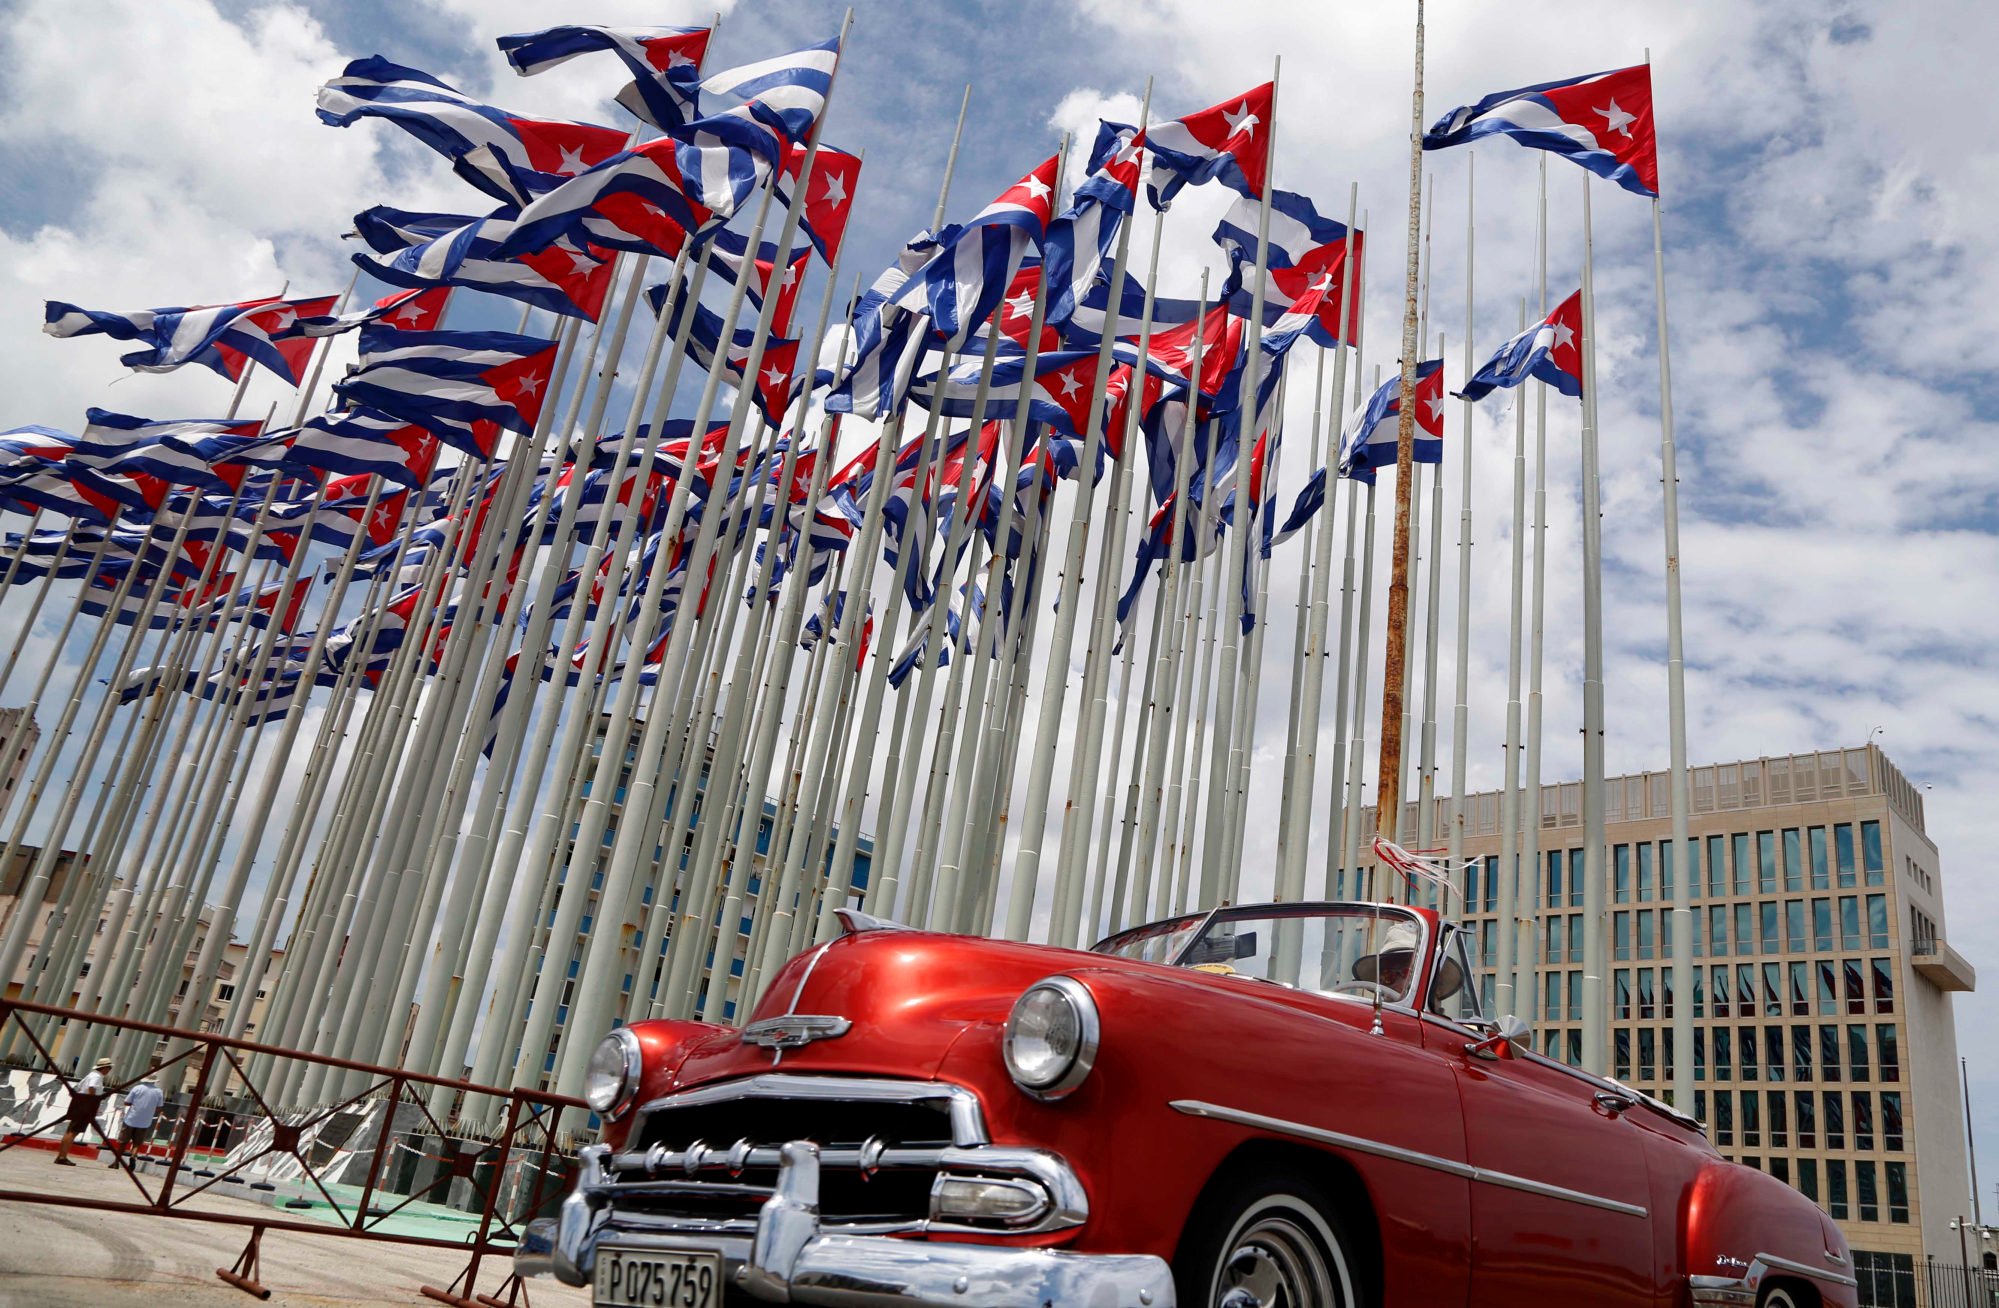 Cuban flags in Havana. The agreement for the surveillance facility reportedly involved Beijing paying Havana billions of US dollars. Photo: AP